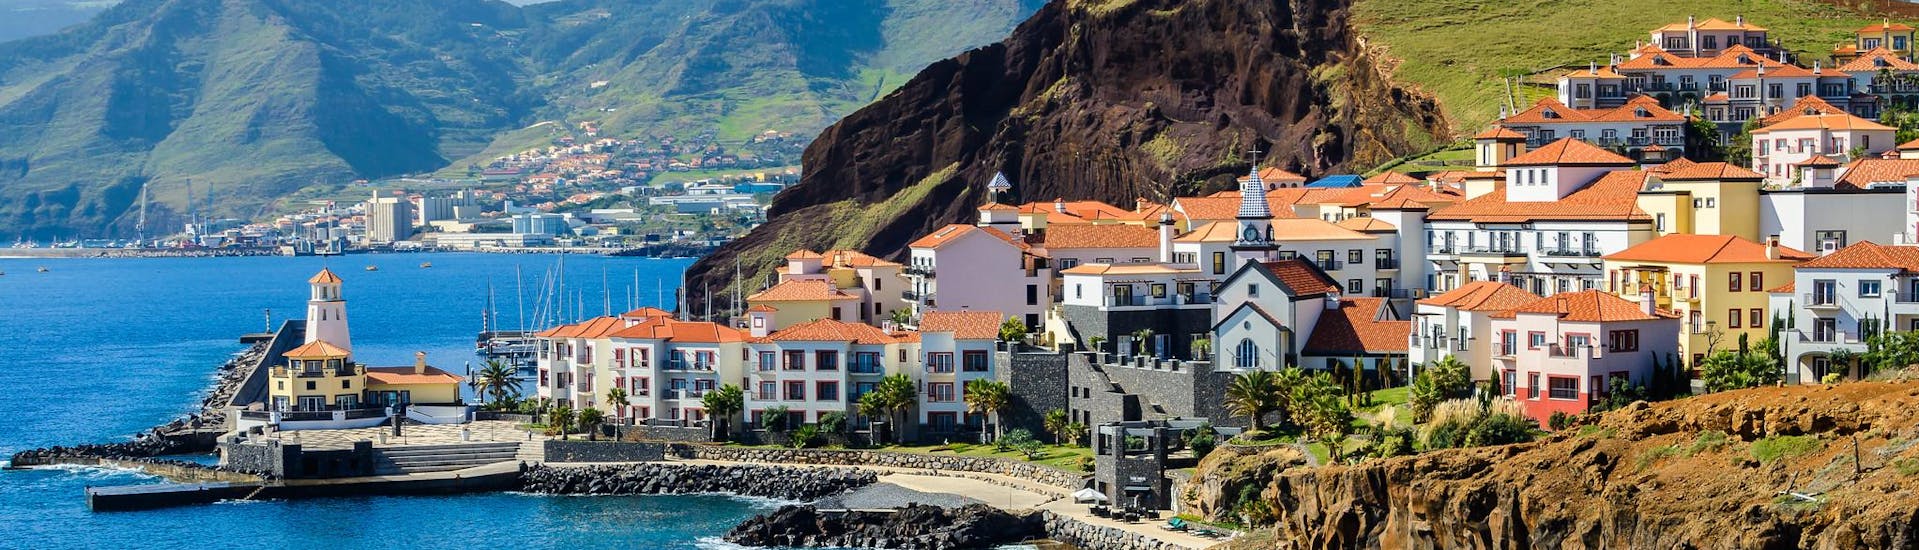 View over a village in Madeira, a wonderful island that you can discover with a boat trip.